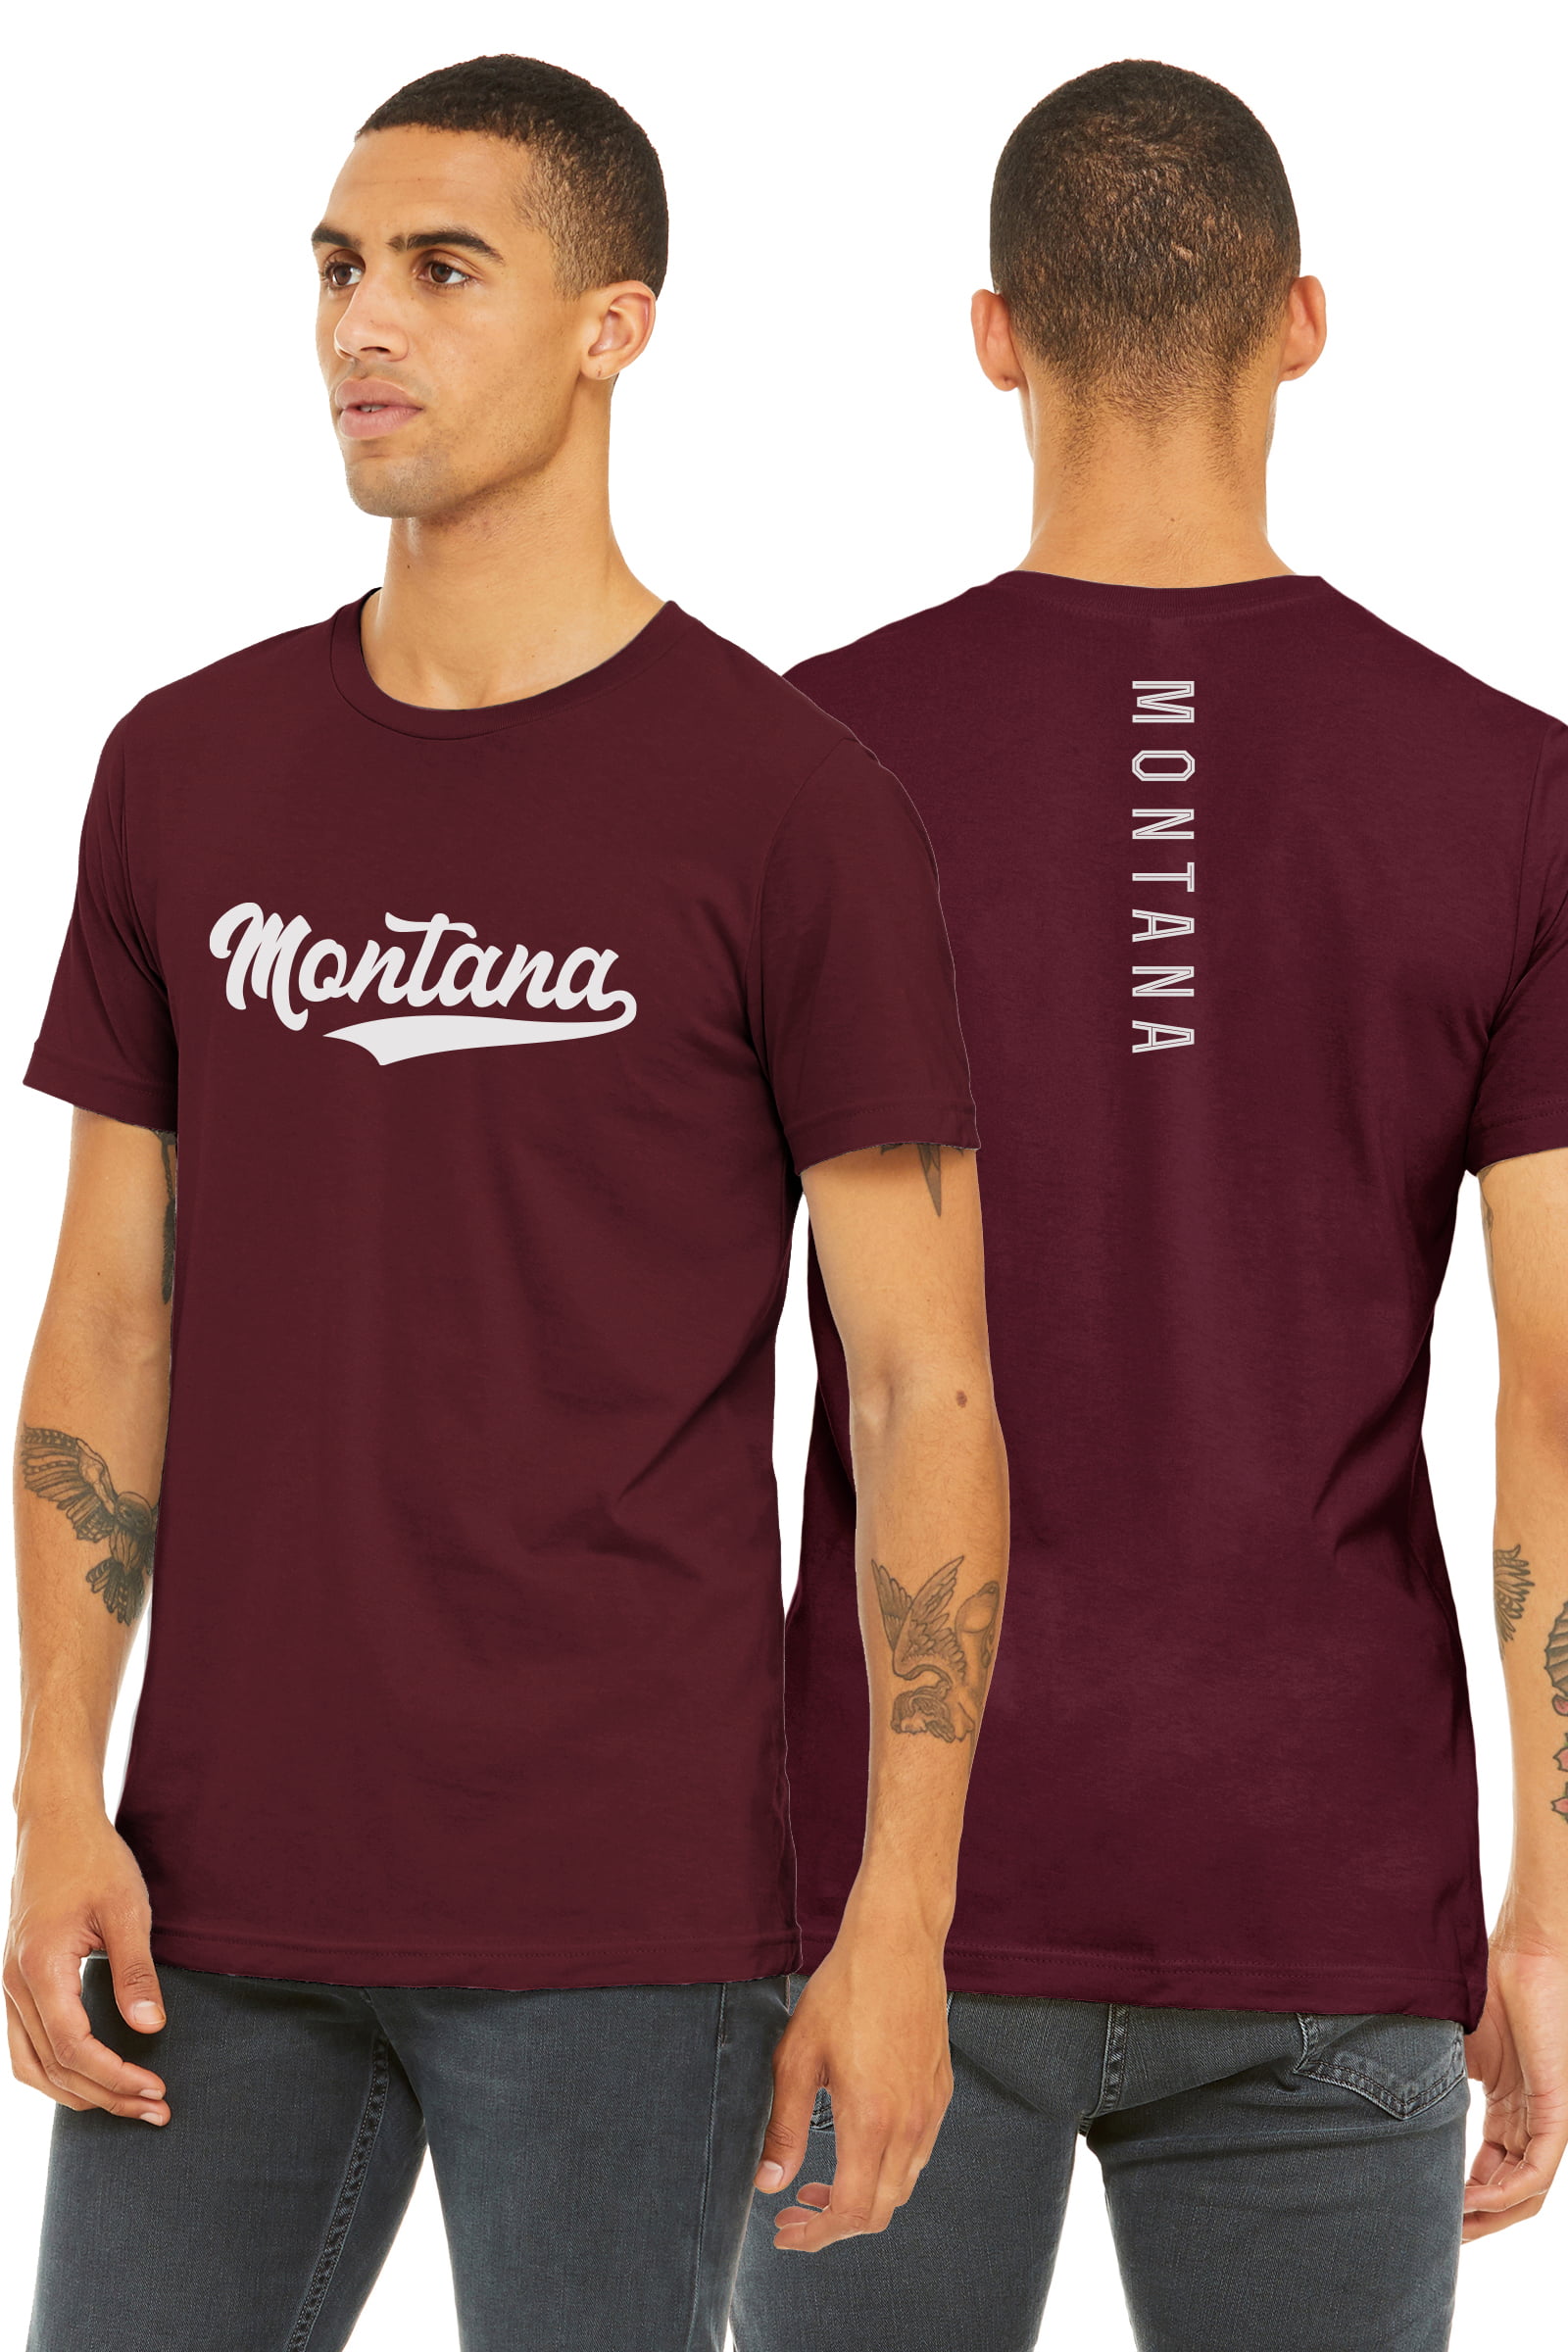 Daxton Adult Unisex Tshirt Montana Script with Vertical on the Back,  Burgundy White, M 